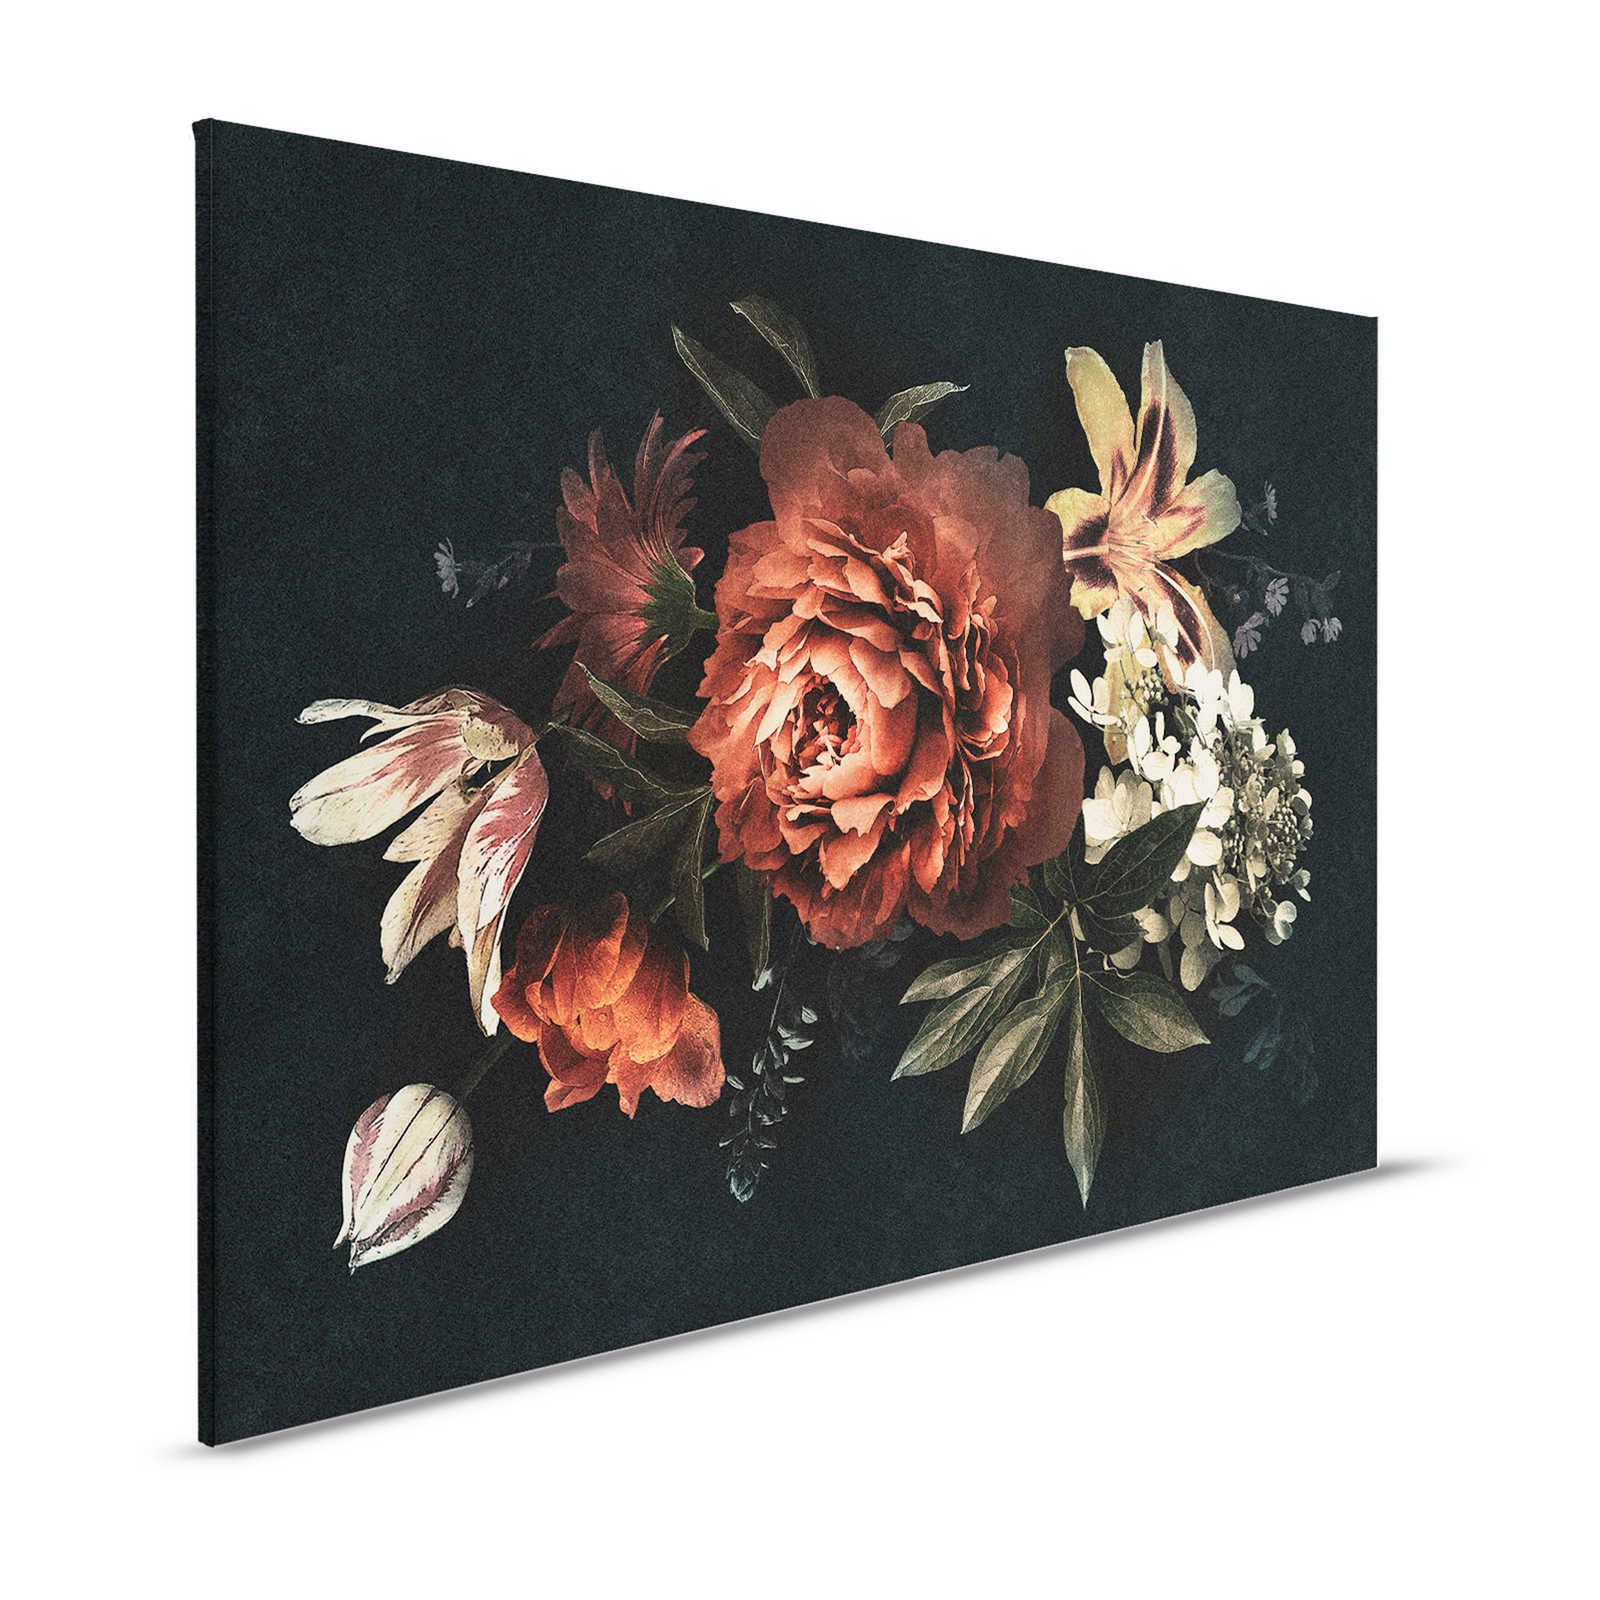 Drama queen 1 - Bouquet of flowers canvas painting with dark background - 1.20 m x 0.80 m
